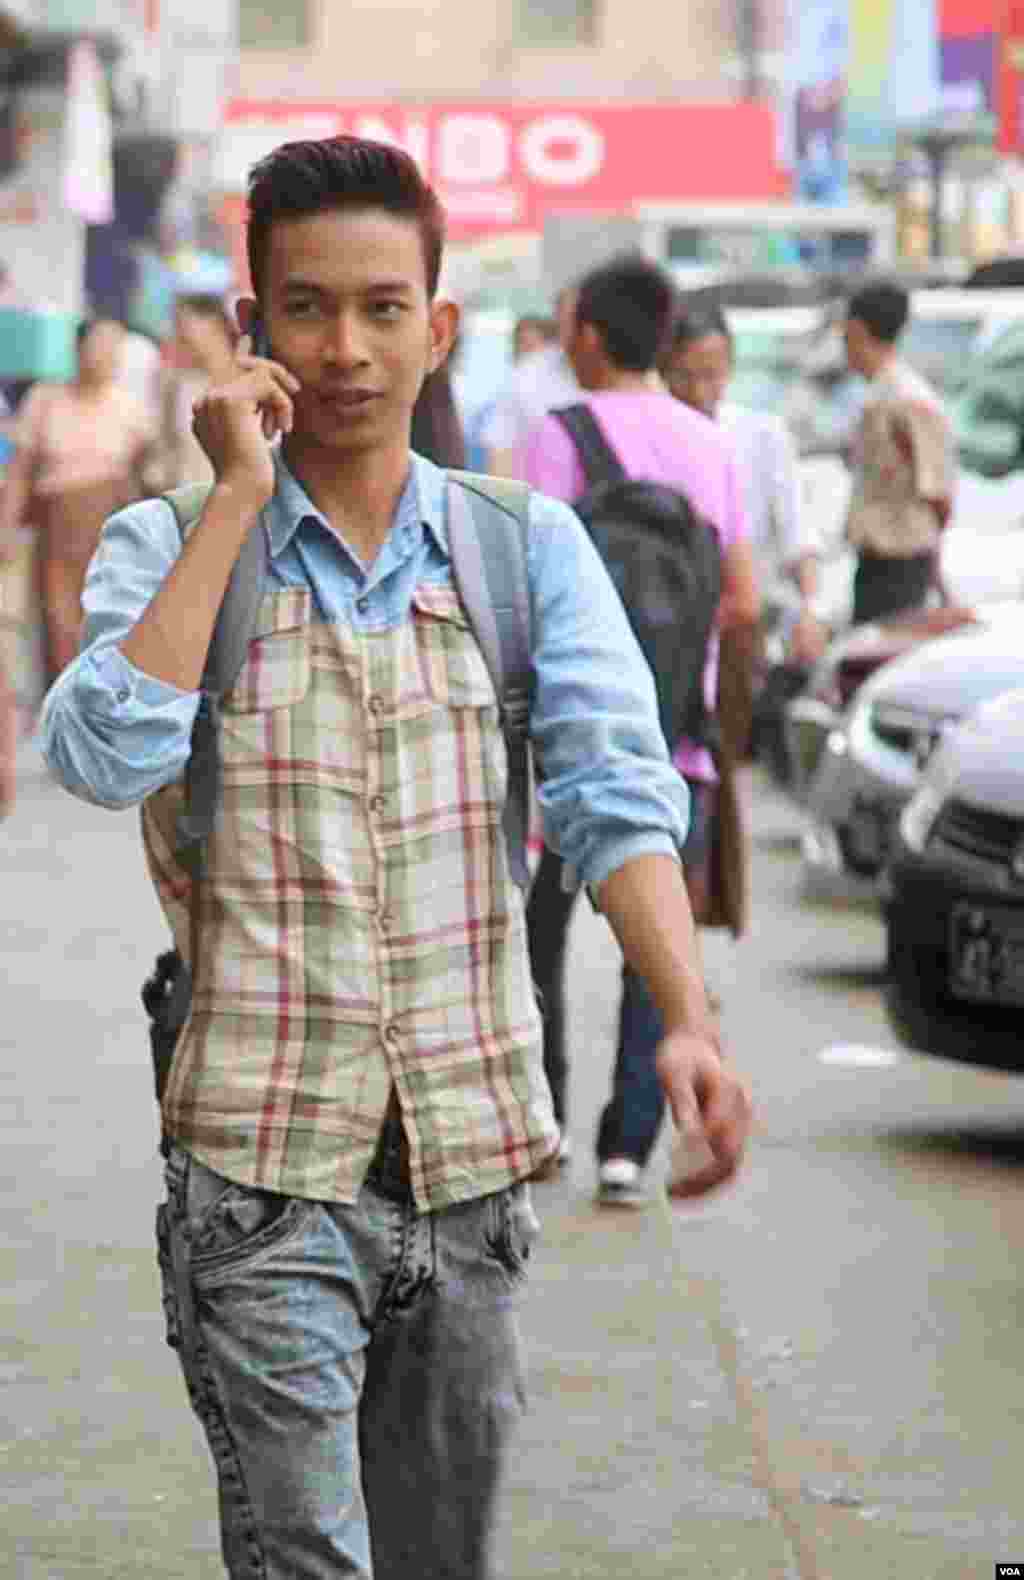 A young Myanmar man wearing jeans. (Zinlat Aung/VOA News)